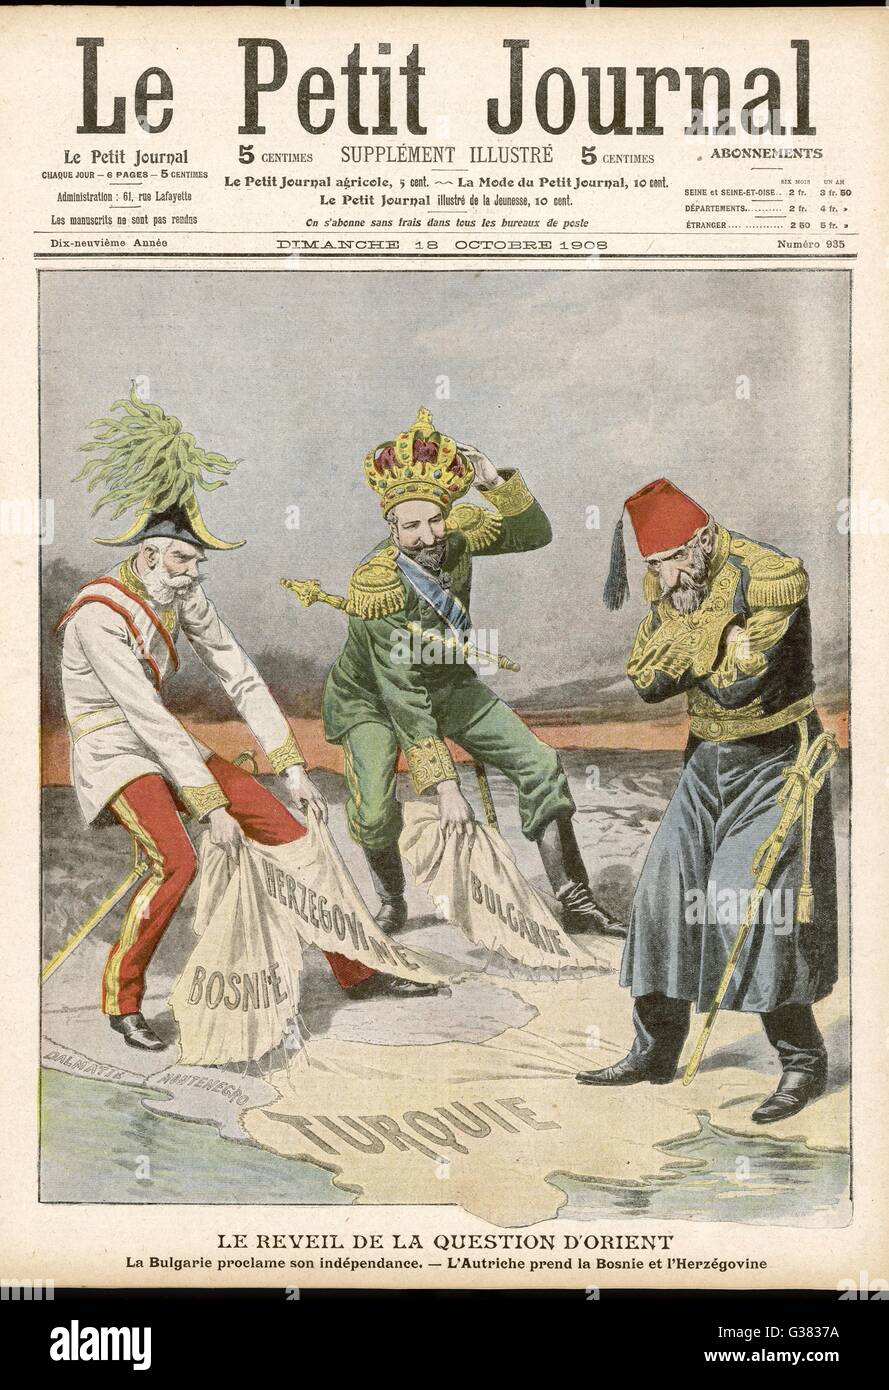 Abdul Hamid II of Turkey is helpless as parts of the Ottoman Empire are whipped  from beneath his feet by Bulgaria and Austria      Date: 1908 Stock Photo